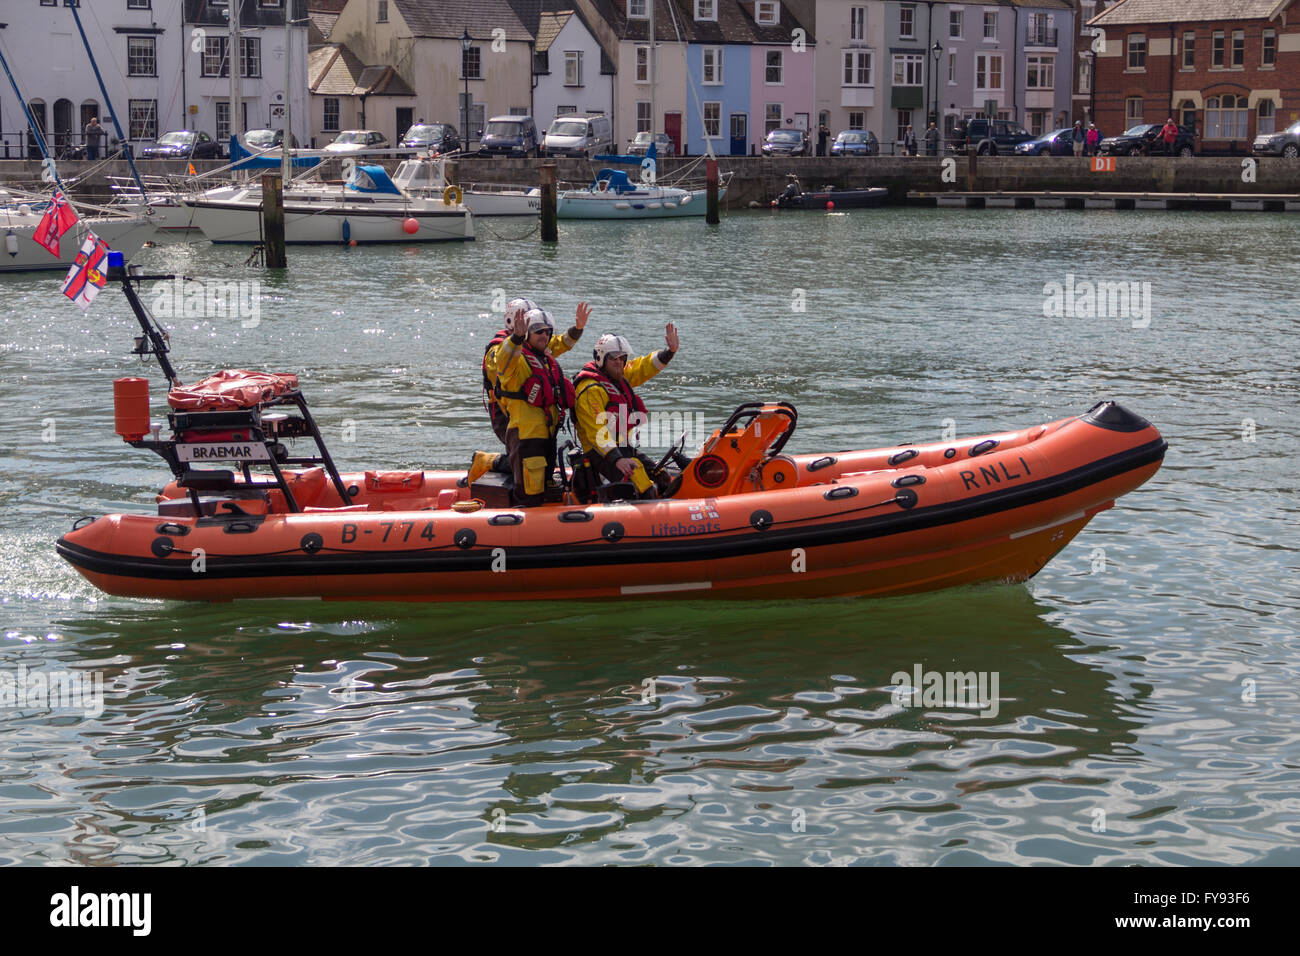 Weymouth, England. 23 April 2016. Queen's 90th Birthday Floating Tribute. RnLI Lifeboat Dinghy People Waving. Credit:  Frances Underwood/Alamy Live News Stock Photo